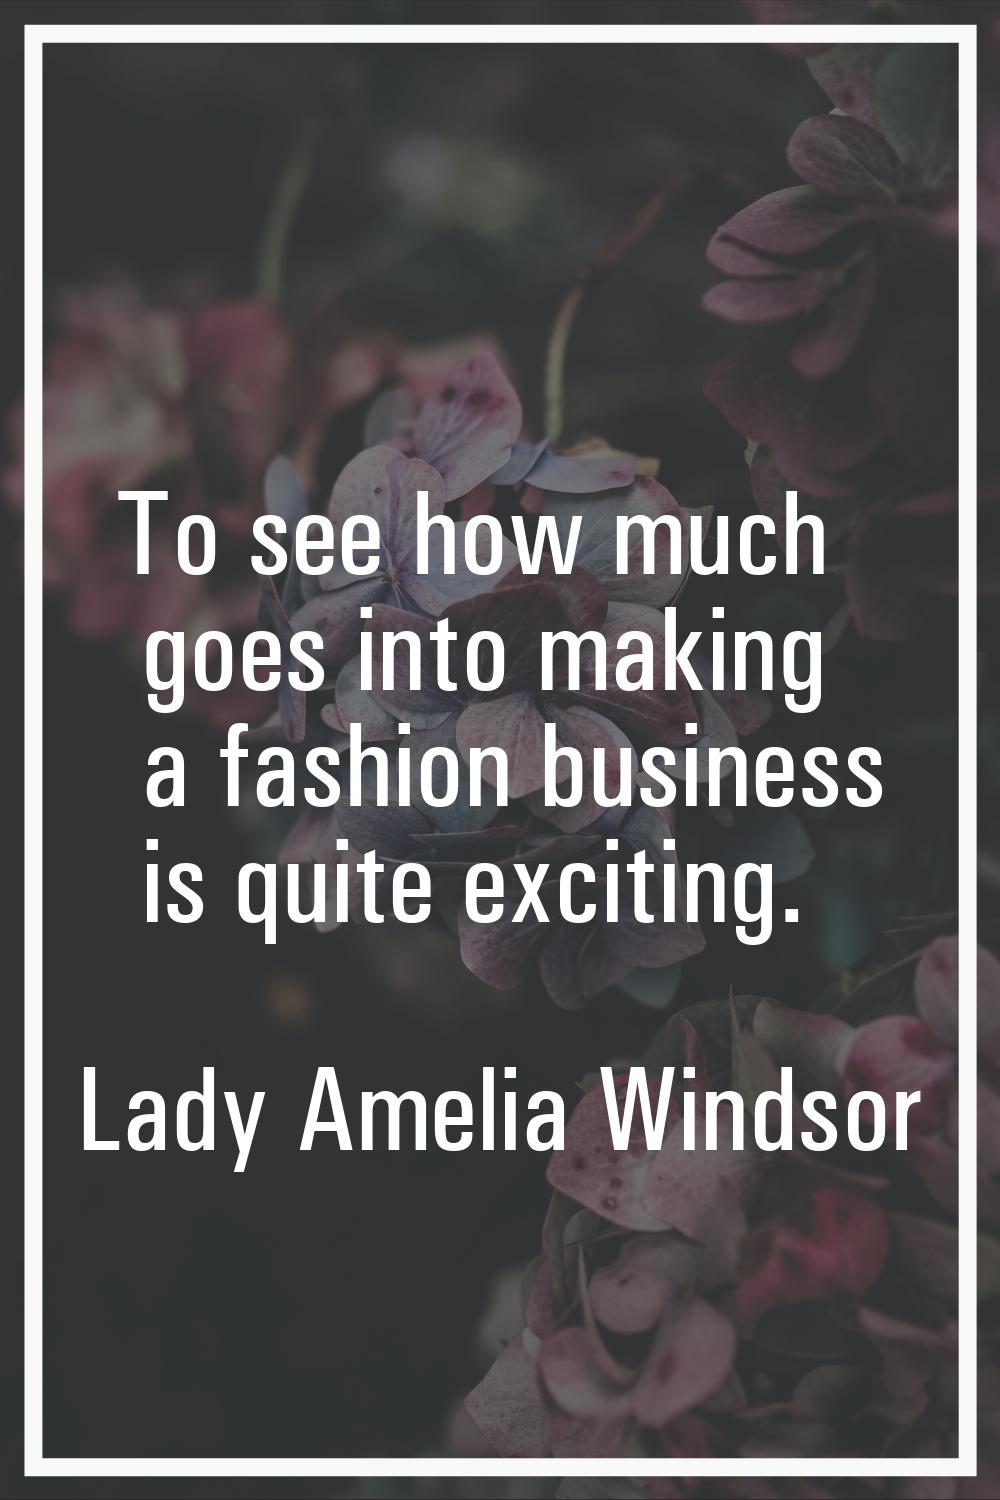 To see how much goes into making a fashion business is quite exciting.